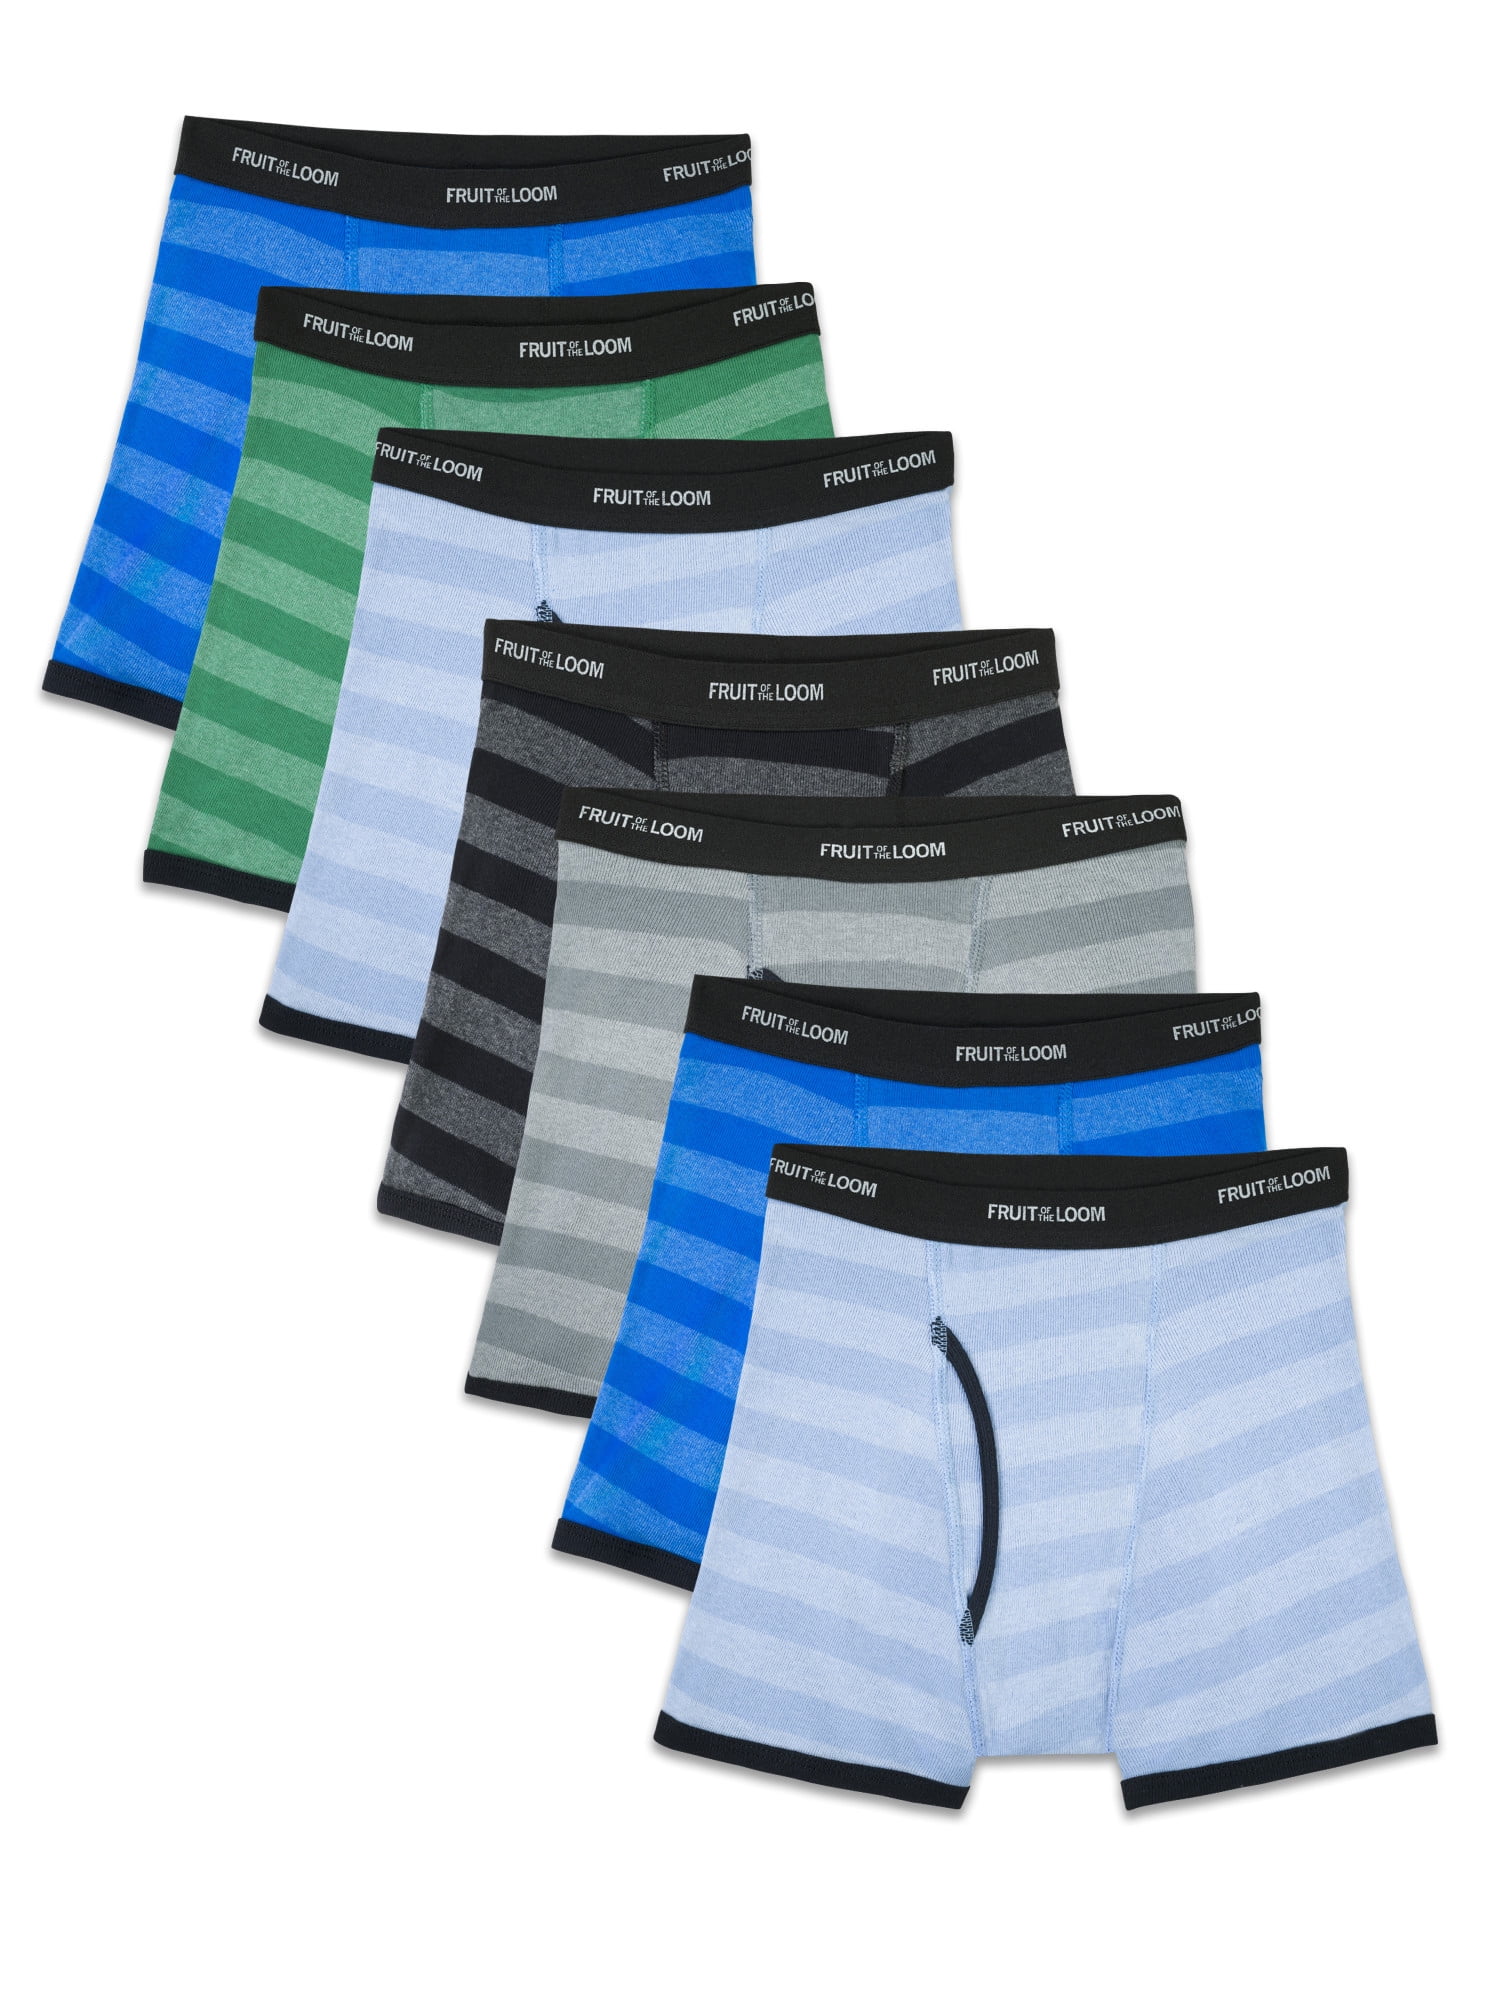 Fruit of the Loom Boys 5 Pack Sport Underwear Boxer Briefs Size 14